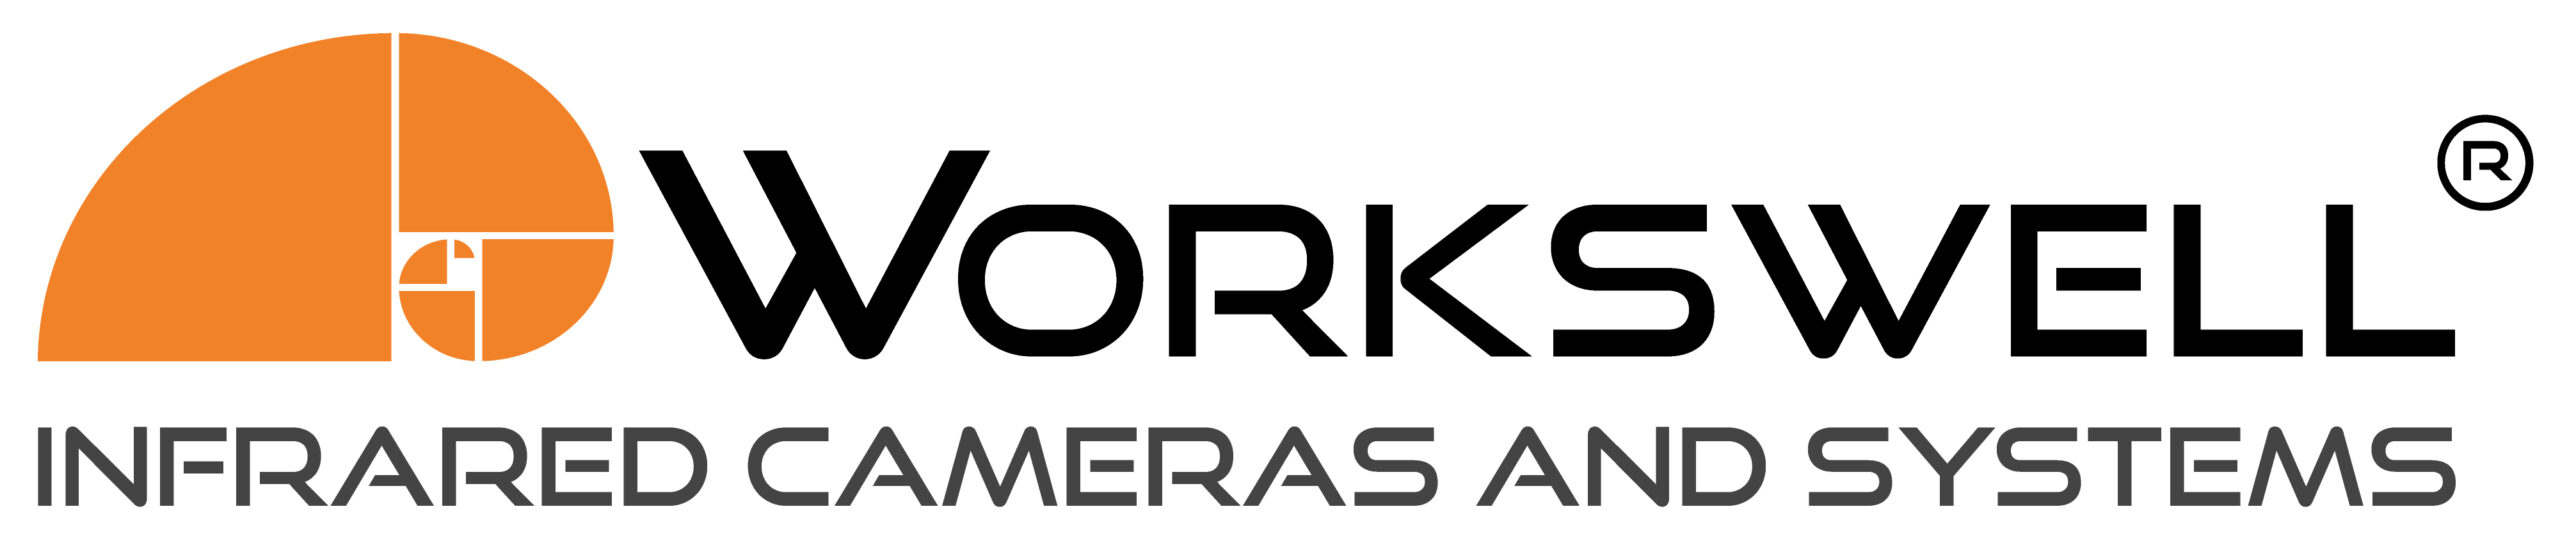 Workswell Thermal Cameras Logo